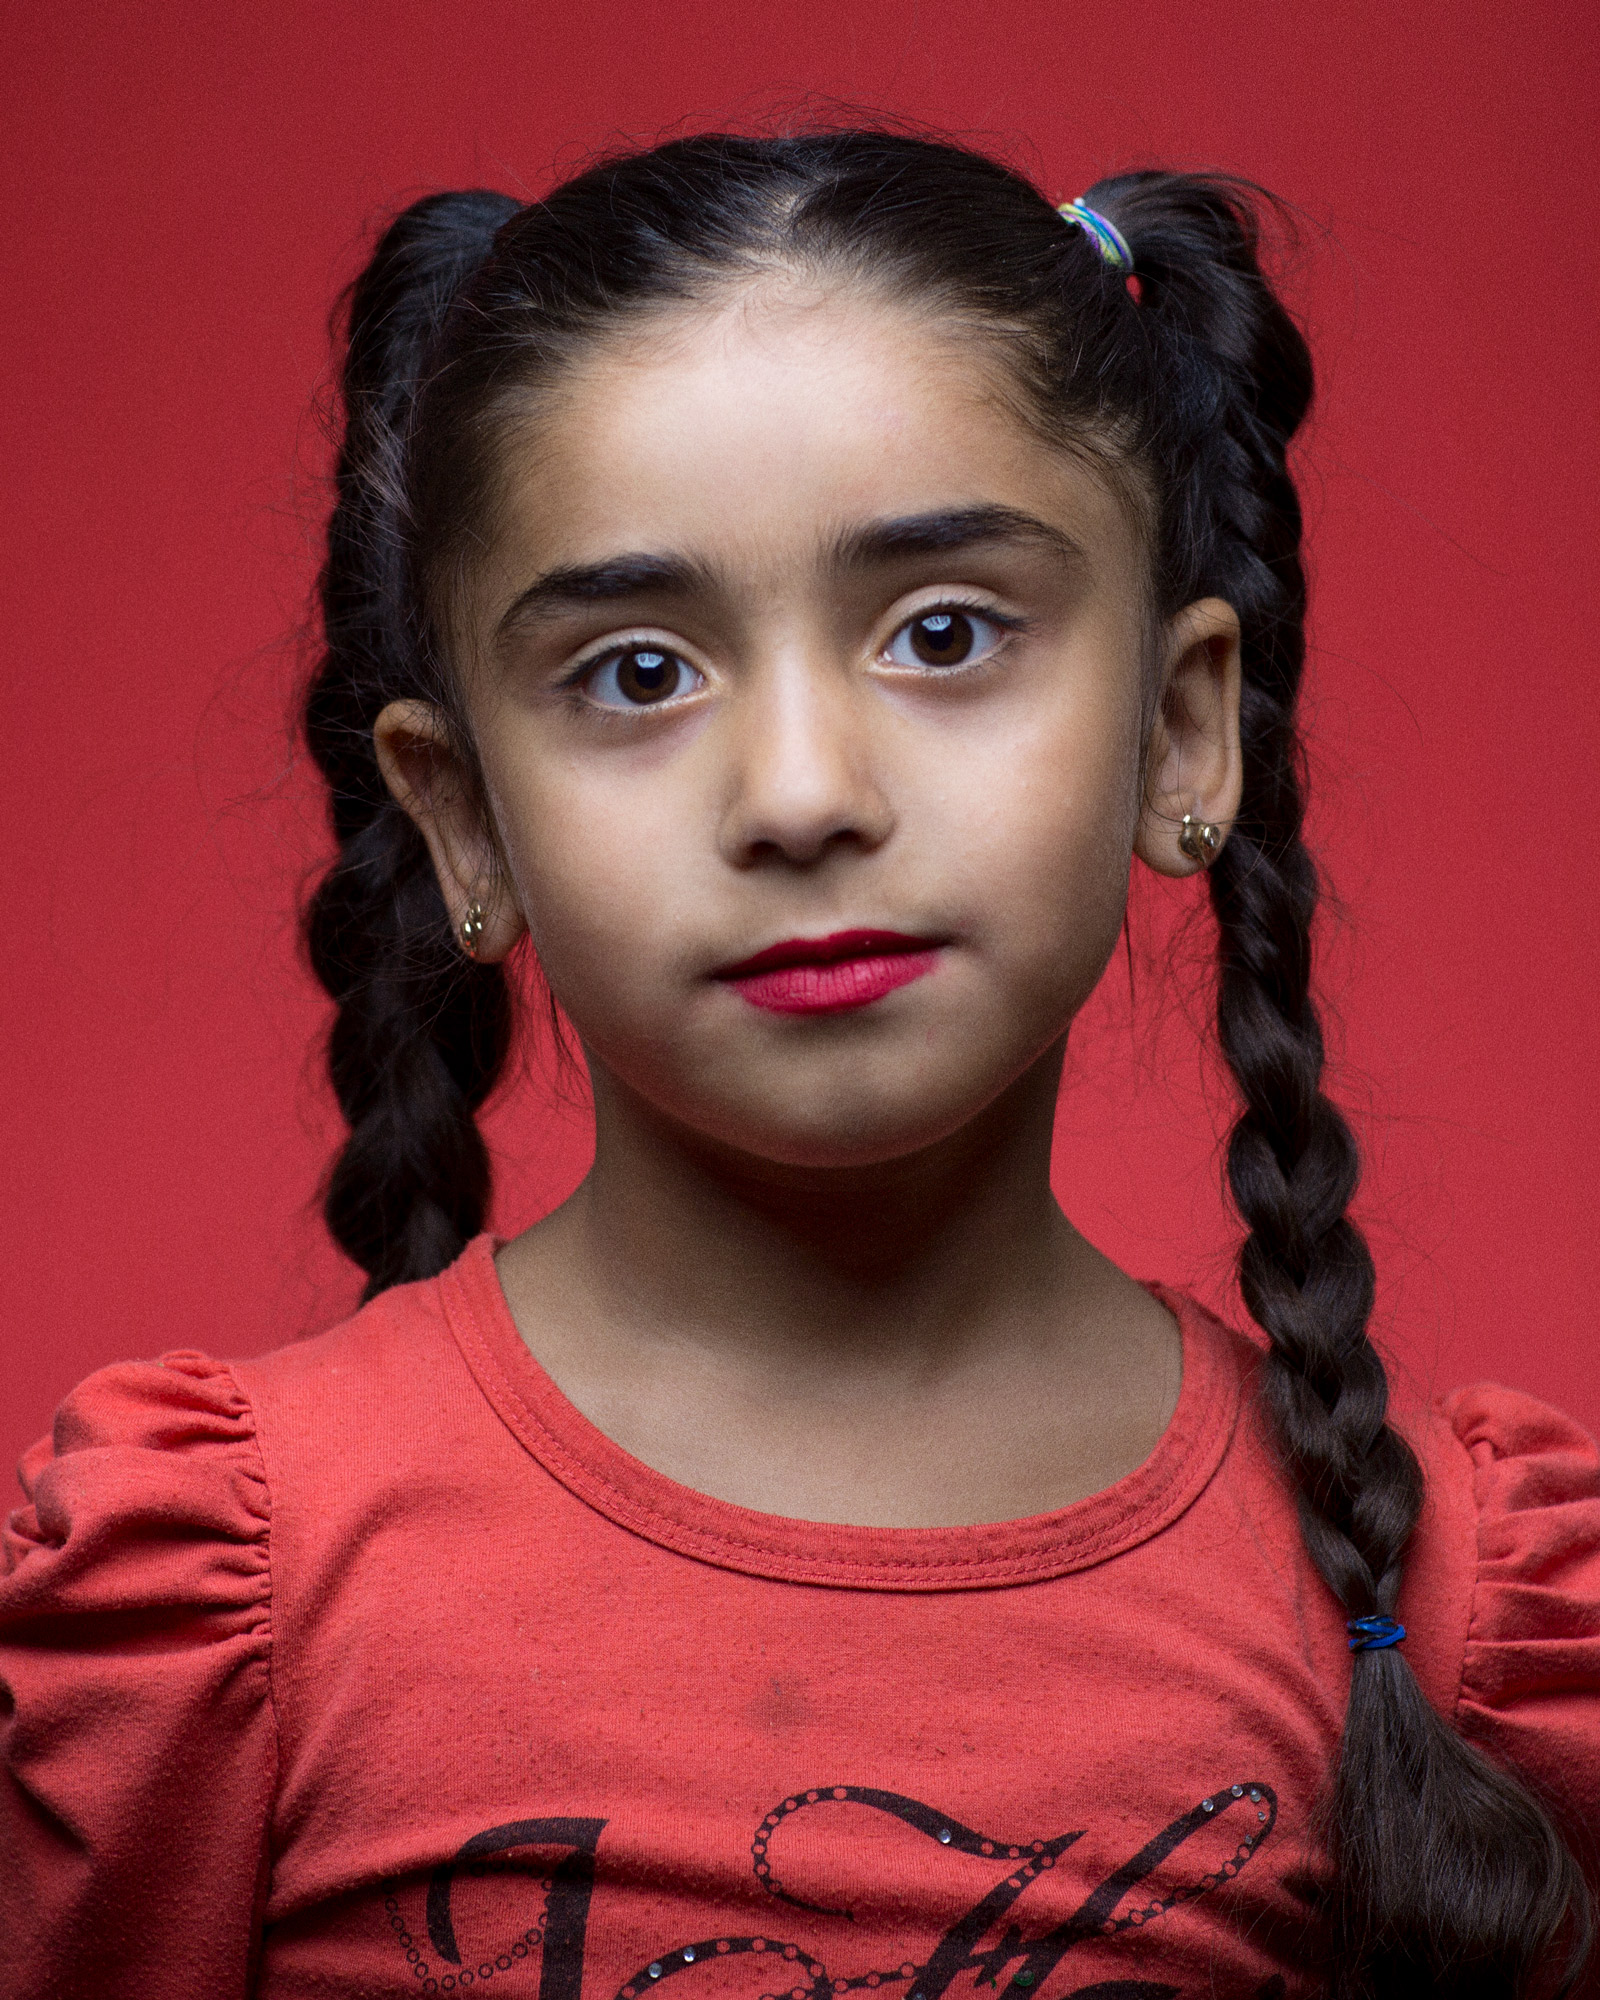 Naram fled the fra in Syria with her parents and siblings. .Portrait by Martin Thaulow